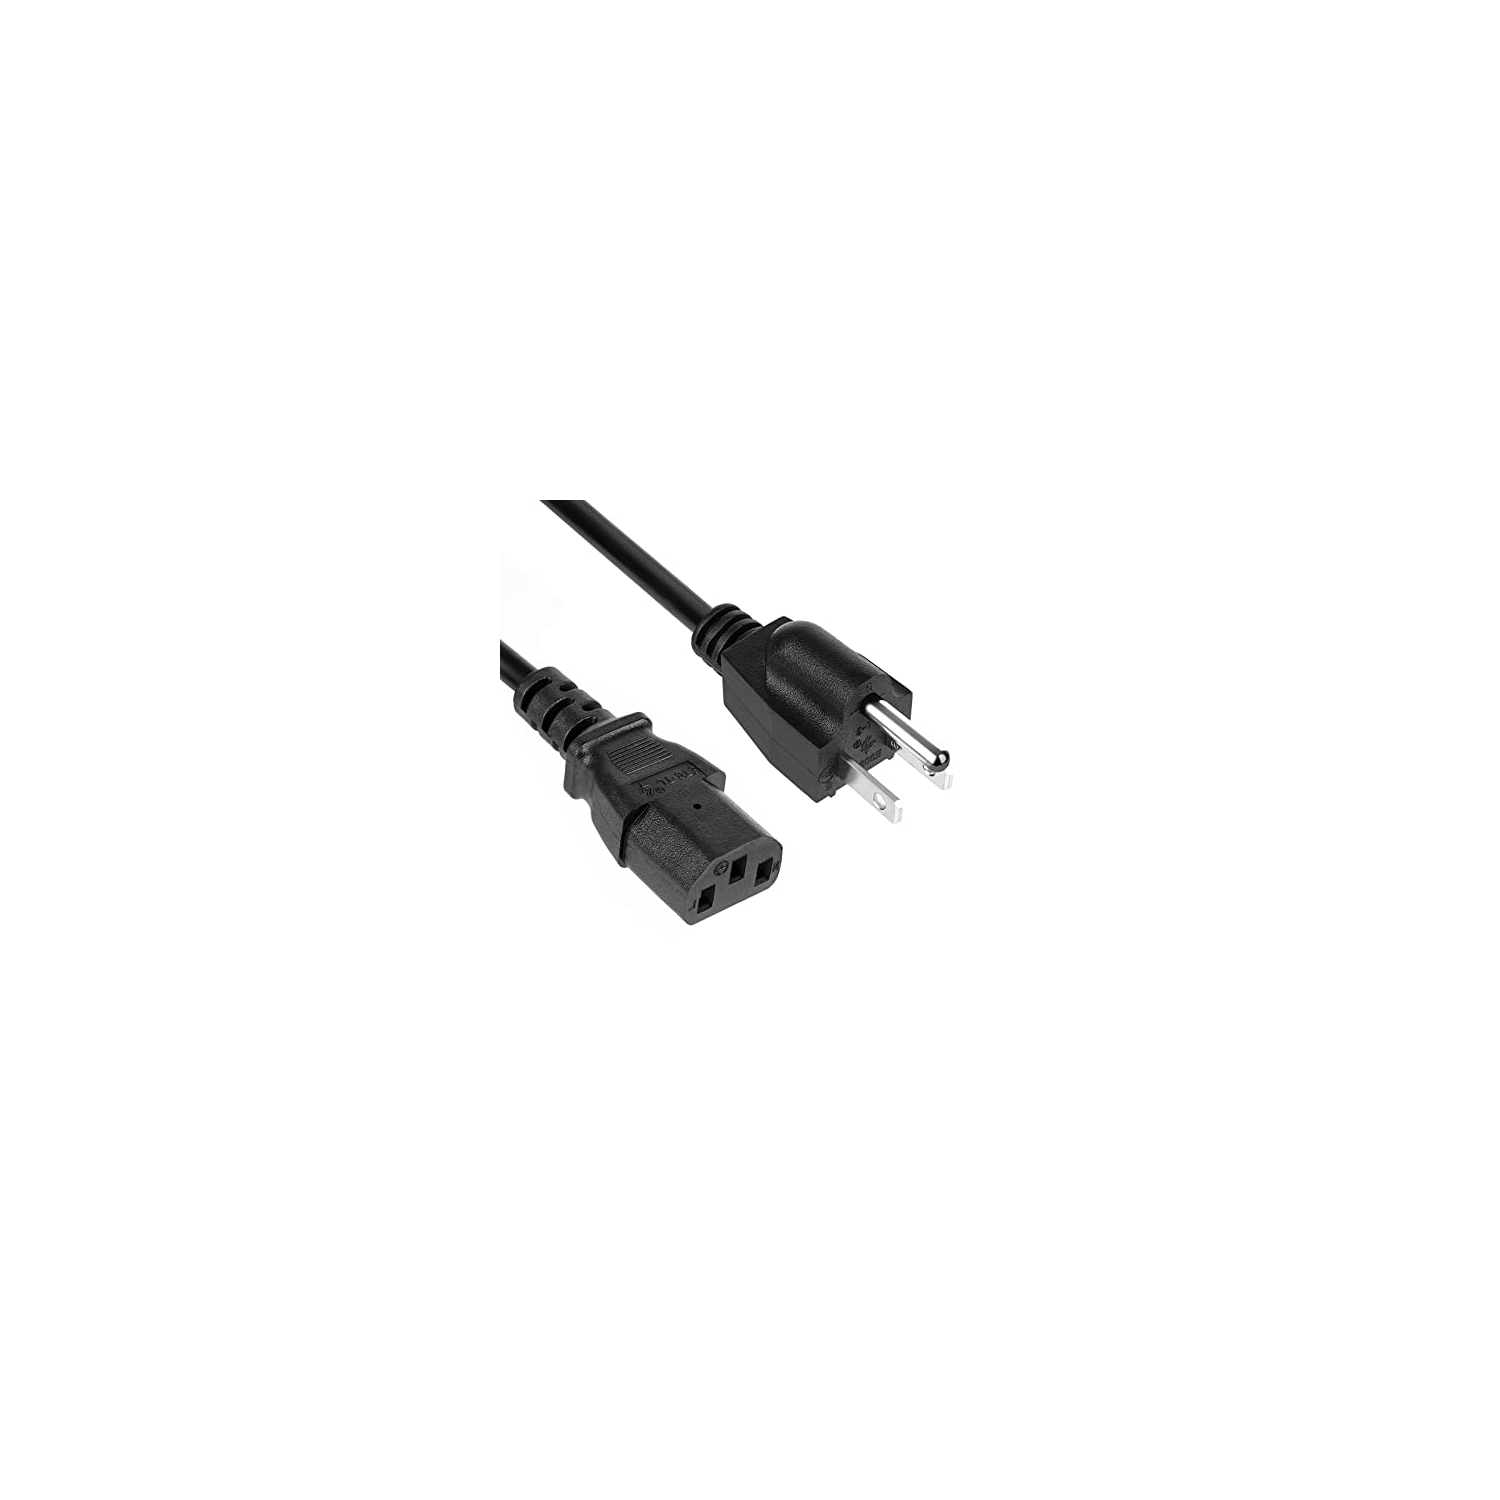 Power Cord Compatible Samsung Plasma TV, ION Speaker, Dynex TV Panasonic Sony Philips Sanyo LG TV 6ft 3 Prong Universal Power Cable Replacement